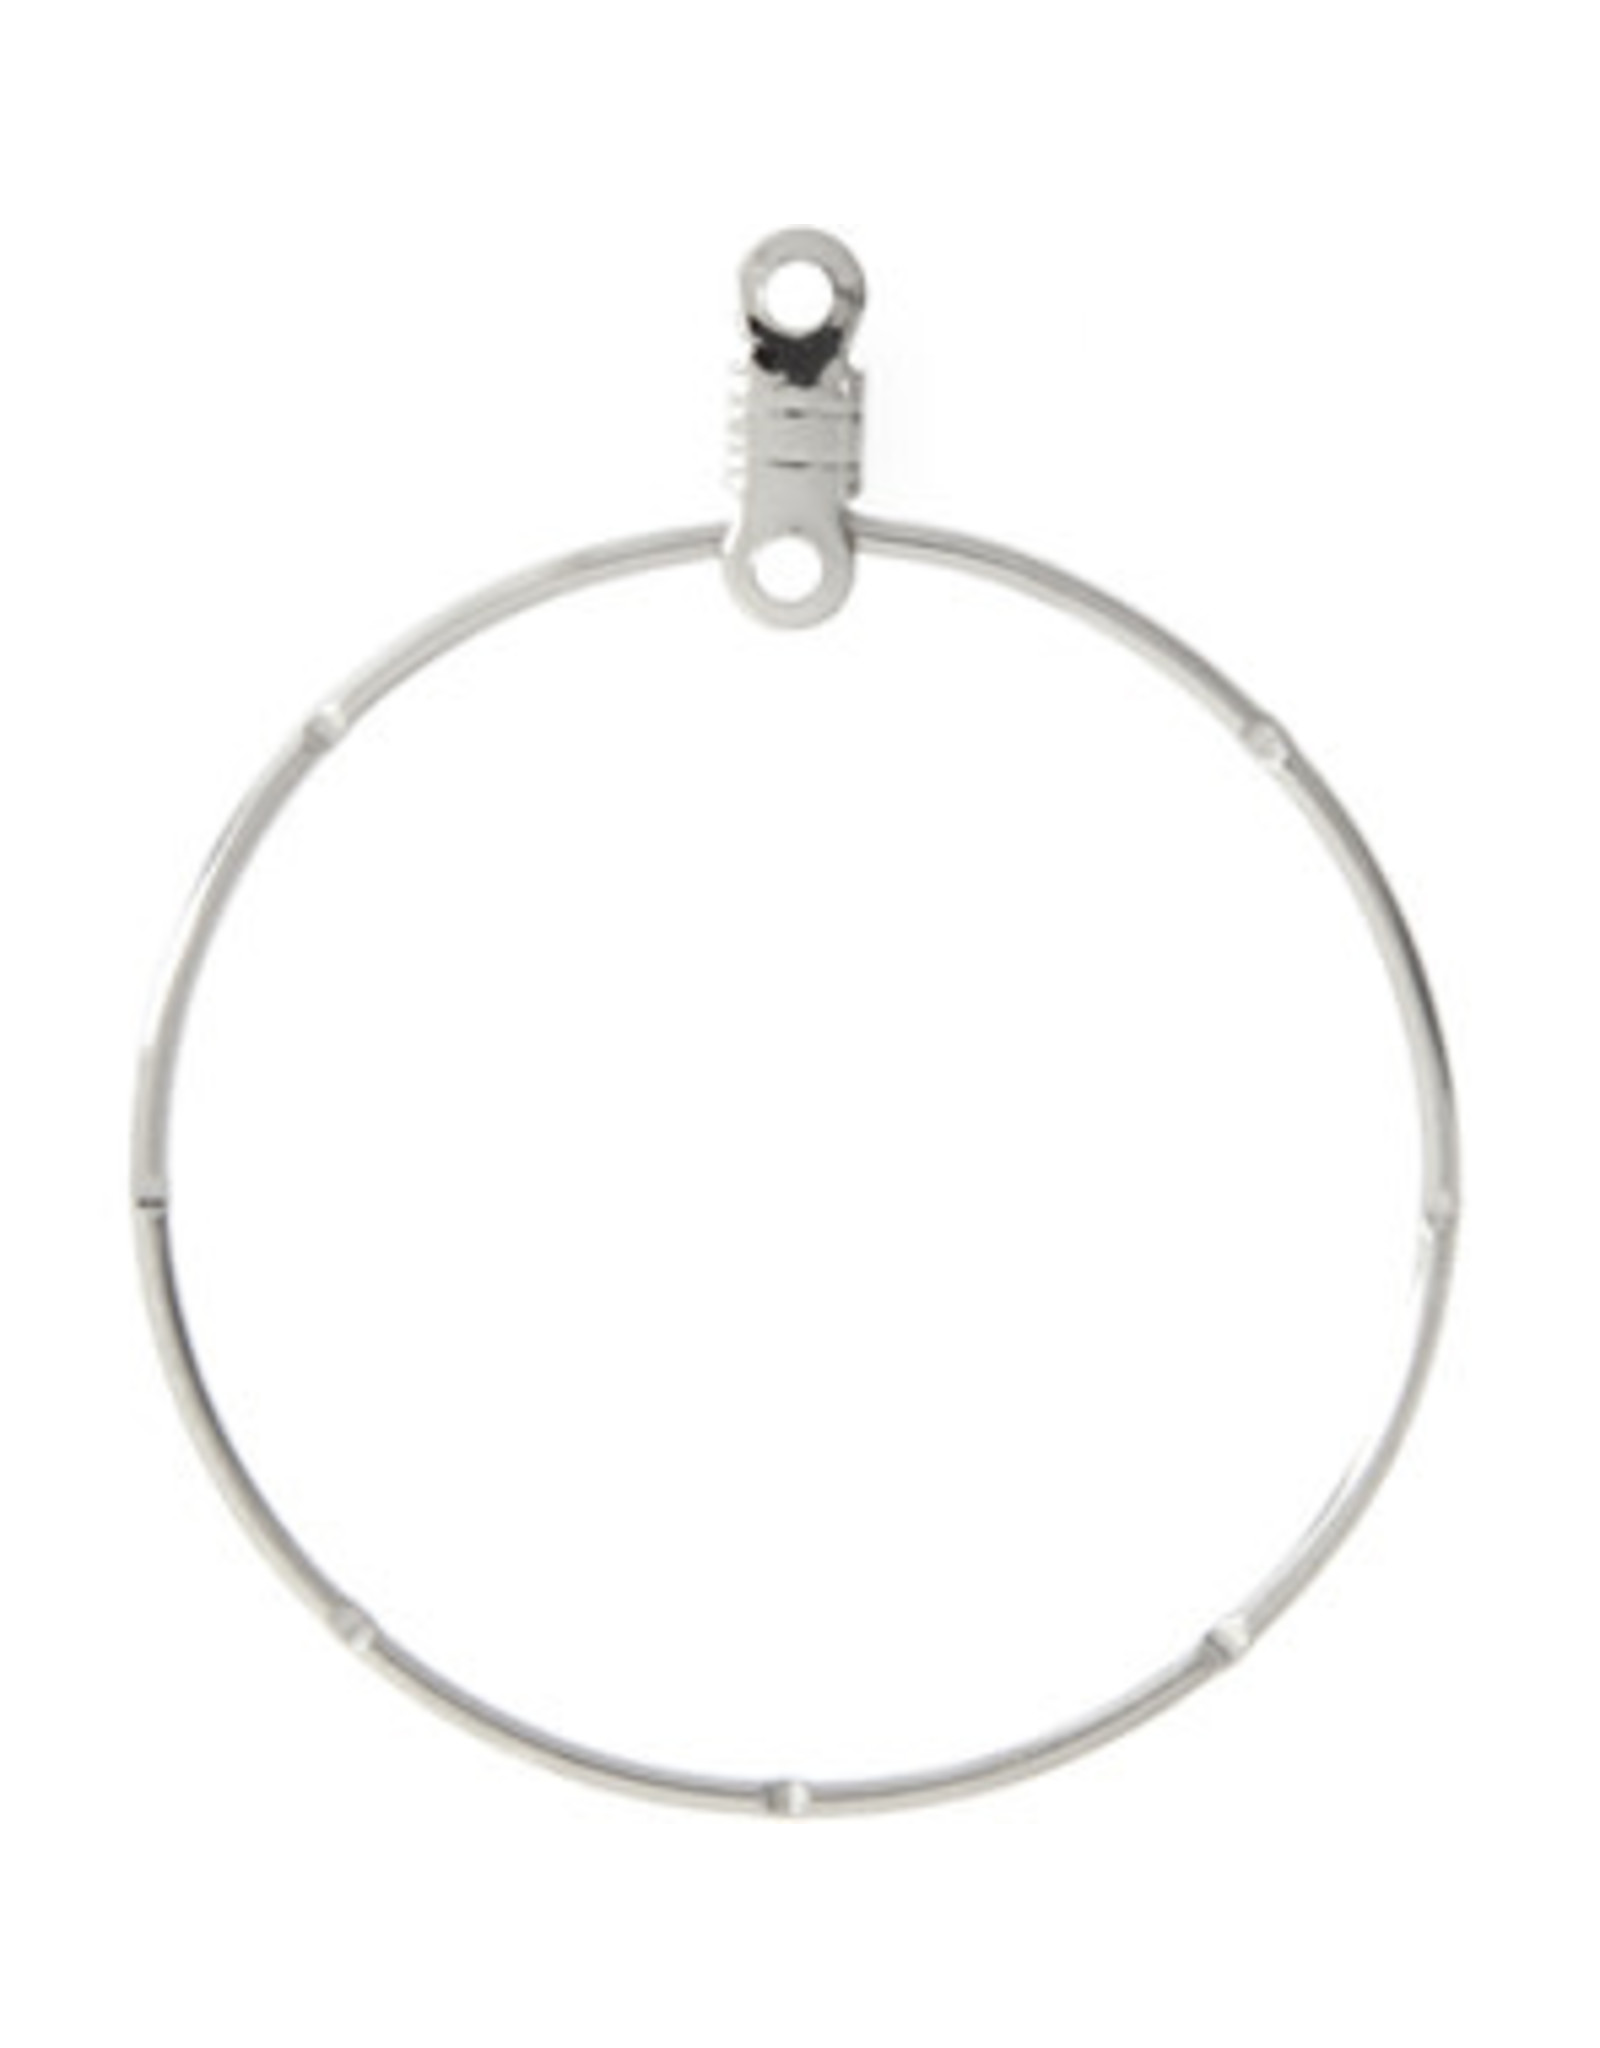 Earring Hoops Notched 30mm Nickel Colour NF x50